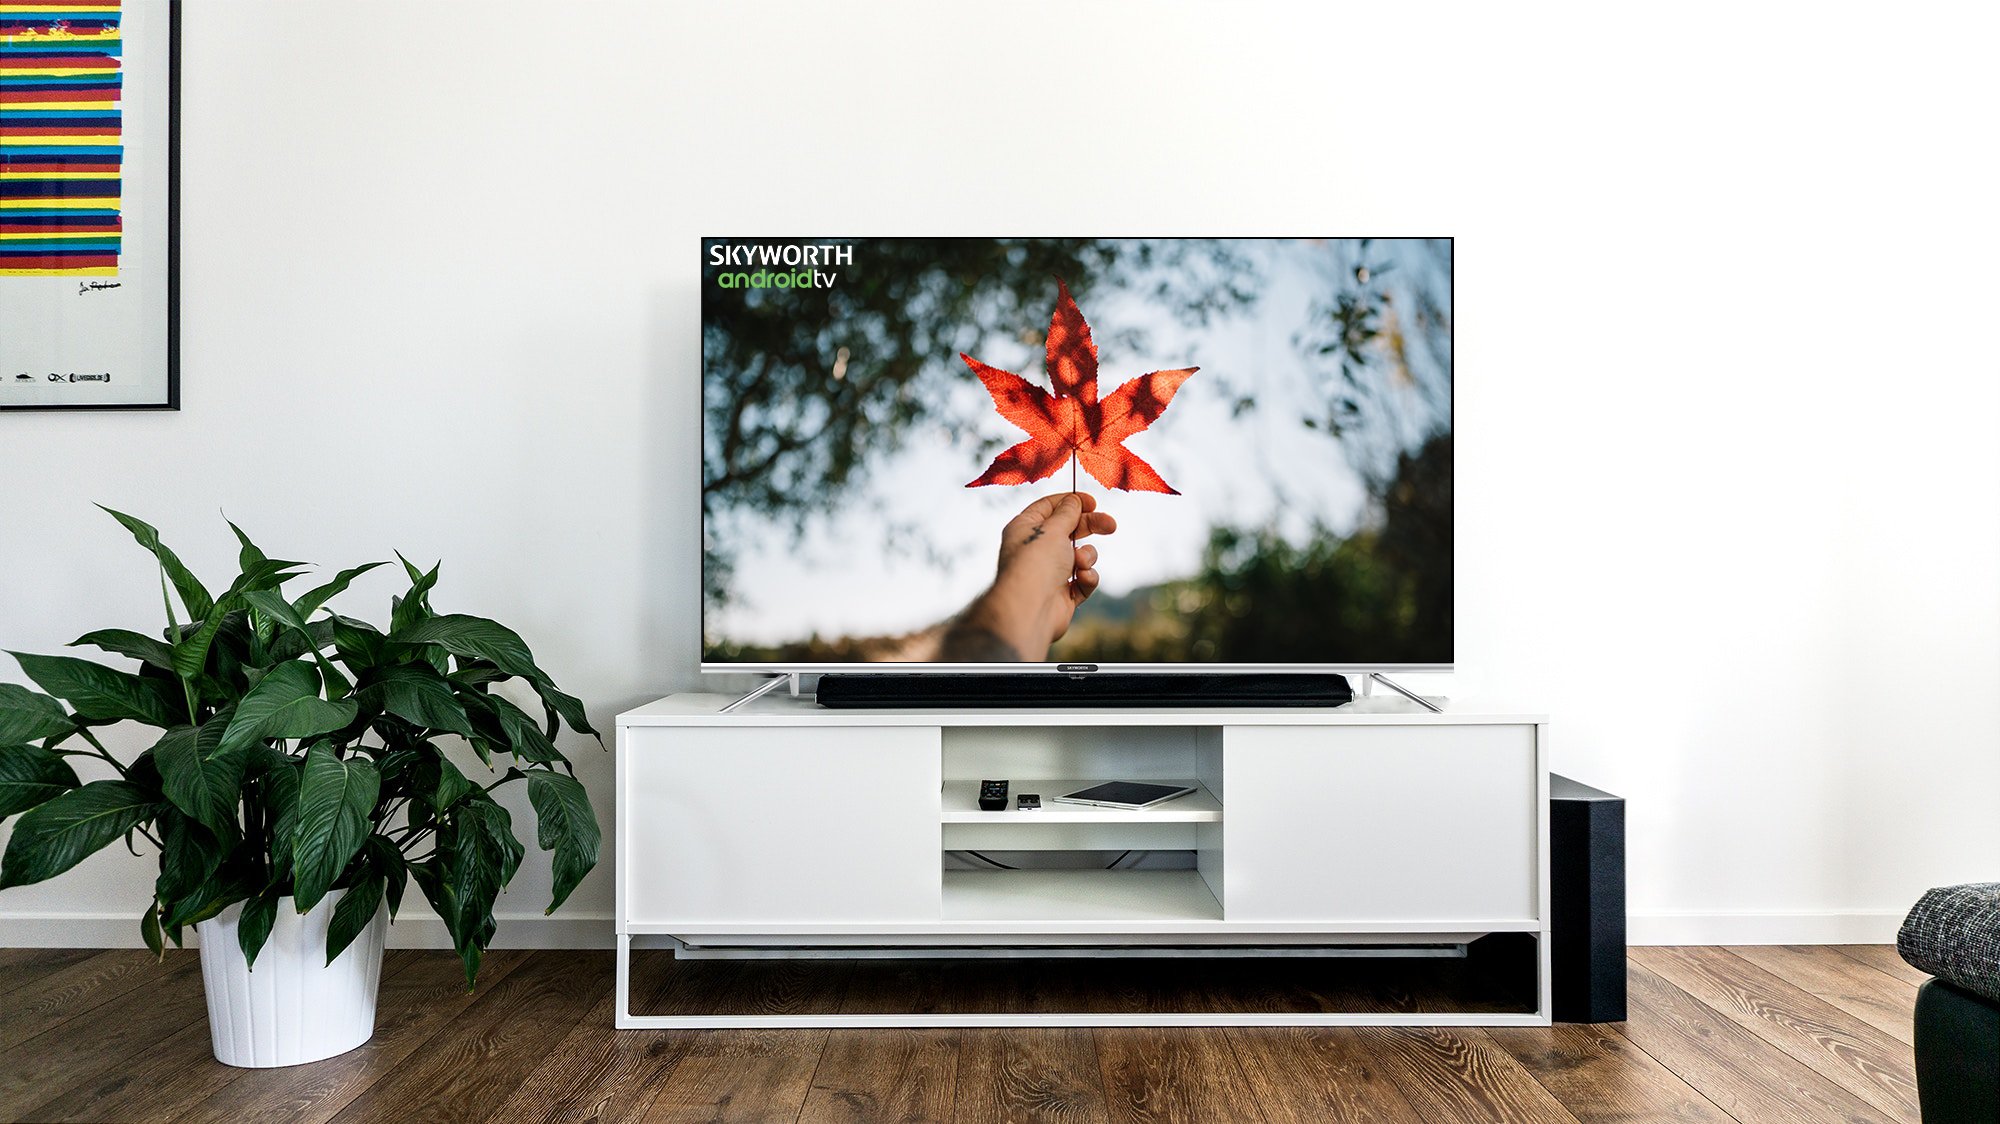 Skyworth Q91 Series: Chinese Innovation in Smart TVs